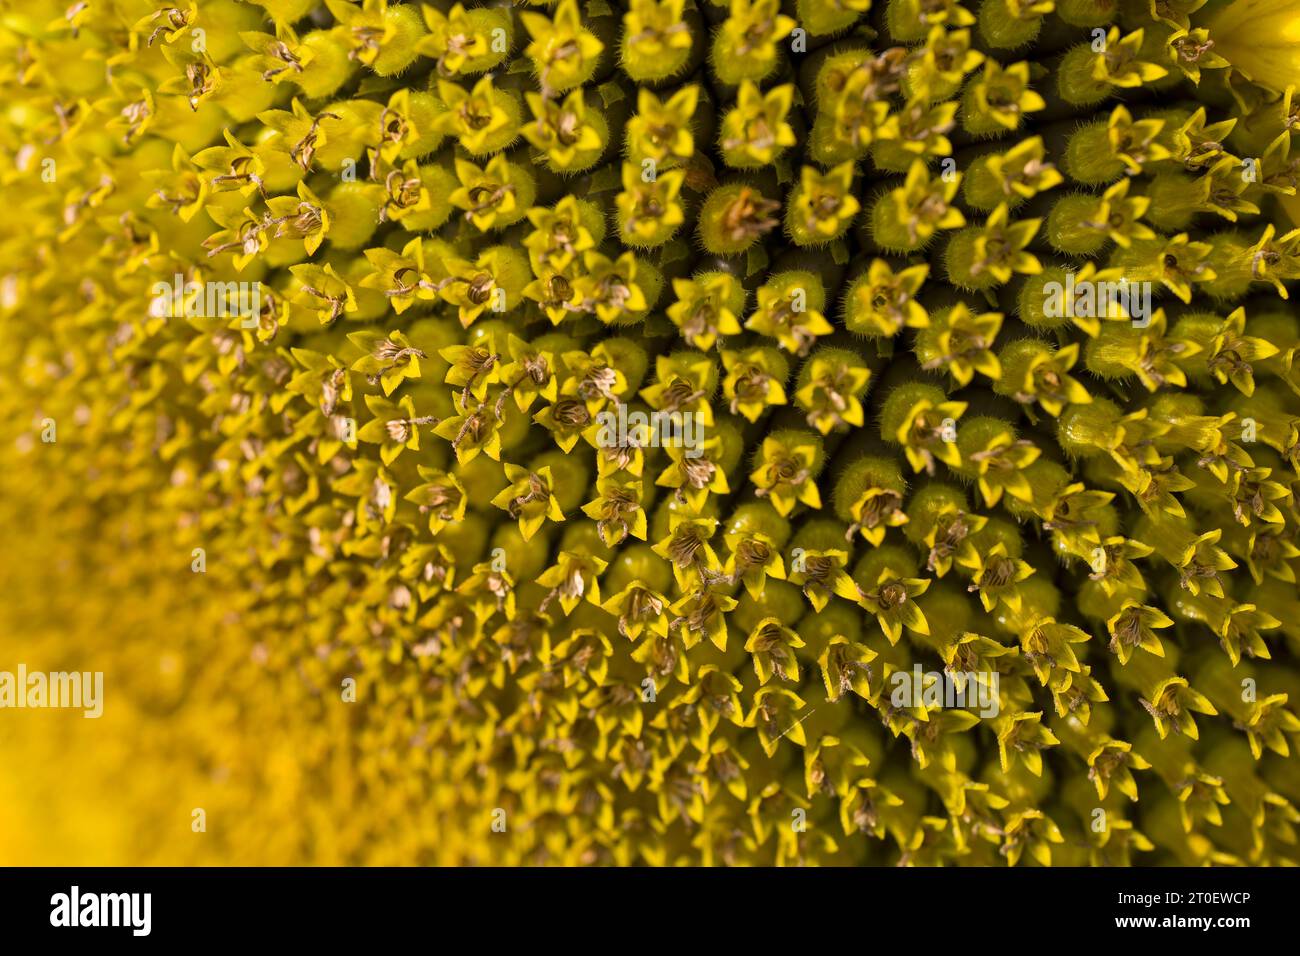 Close-up of a sunflower (Helianthus annuus) flower, flower basket with tubular flowers, Germany Stock Photo